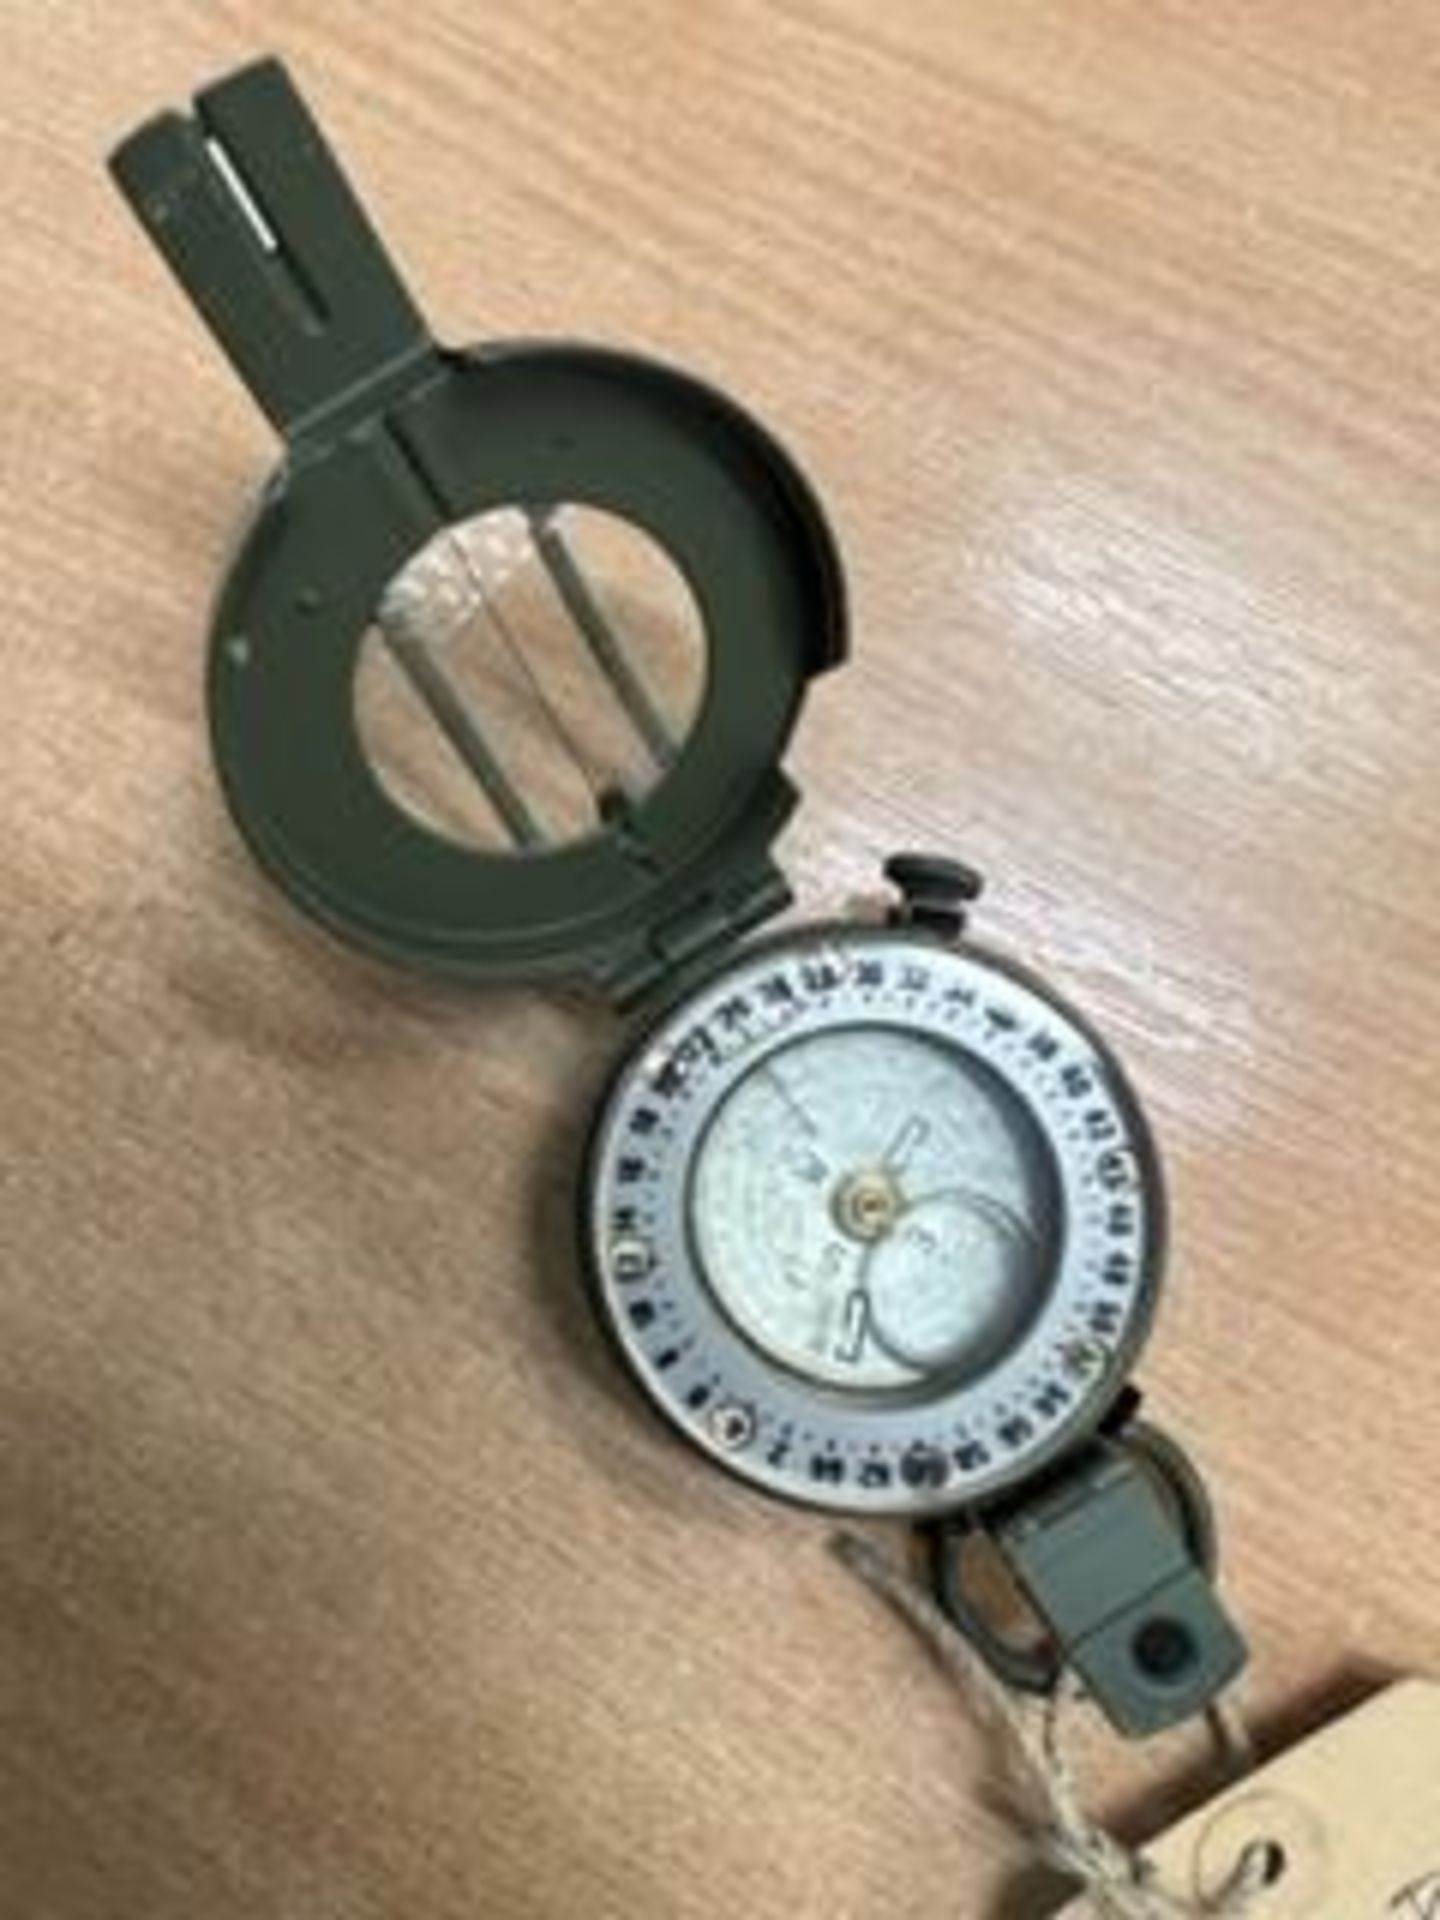 STANLEY LONDON BRITISH ARMY BRASS PRISMATIC COMPASS IN MILS - Image 2 of 6